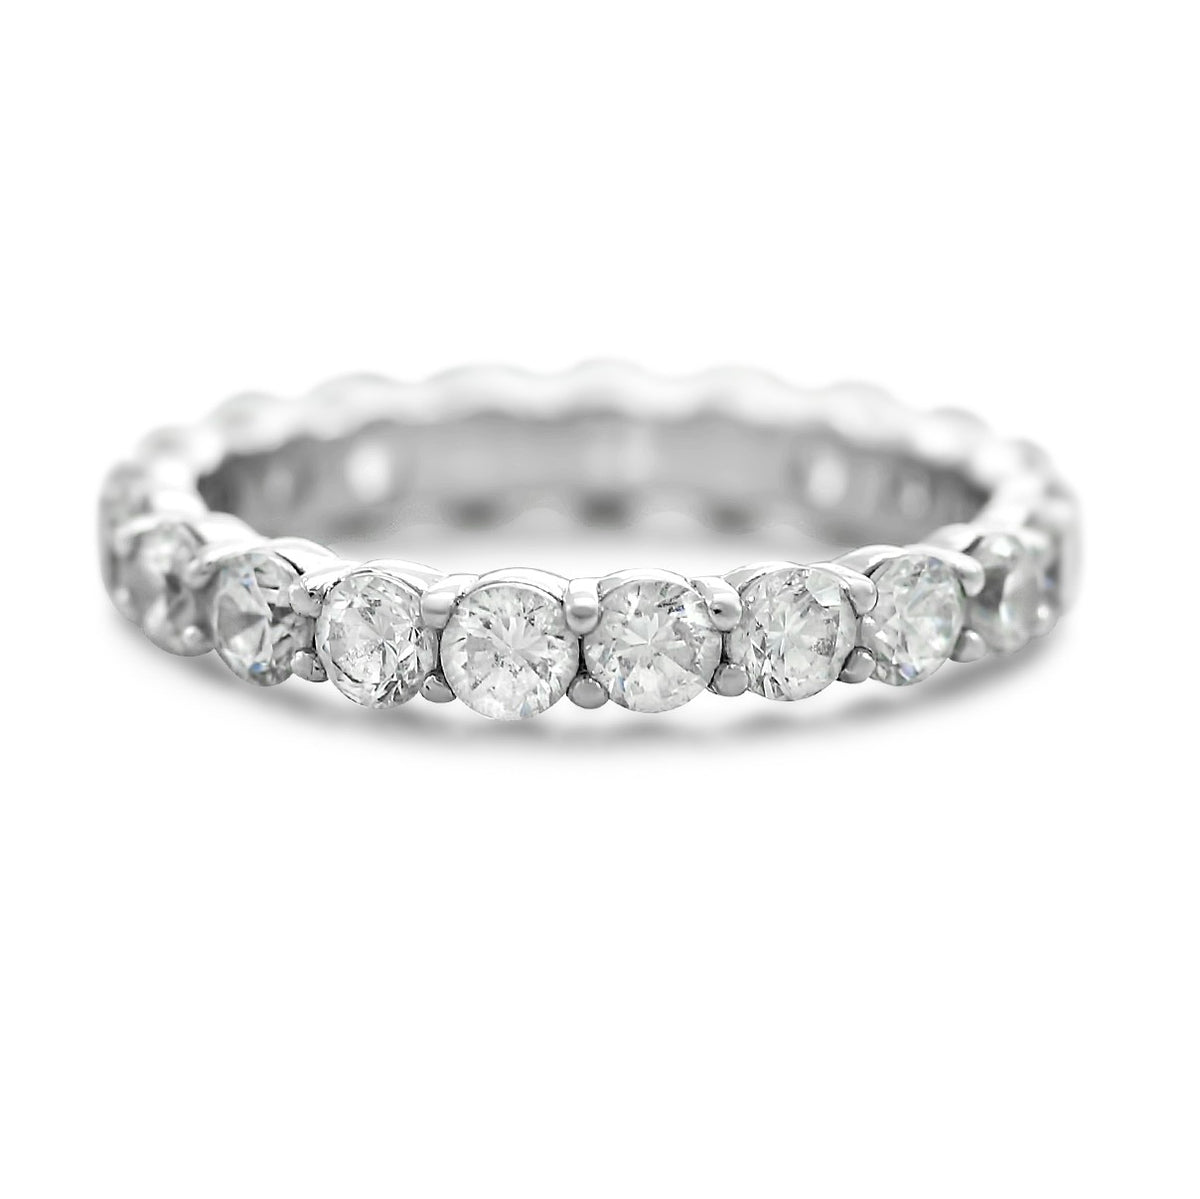 3.0mm diamond eternity wedding band with 2.0tcw of white diamonds available in platinum, or 14k white, yellow or rose gold